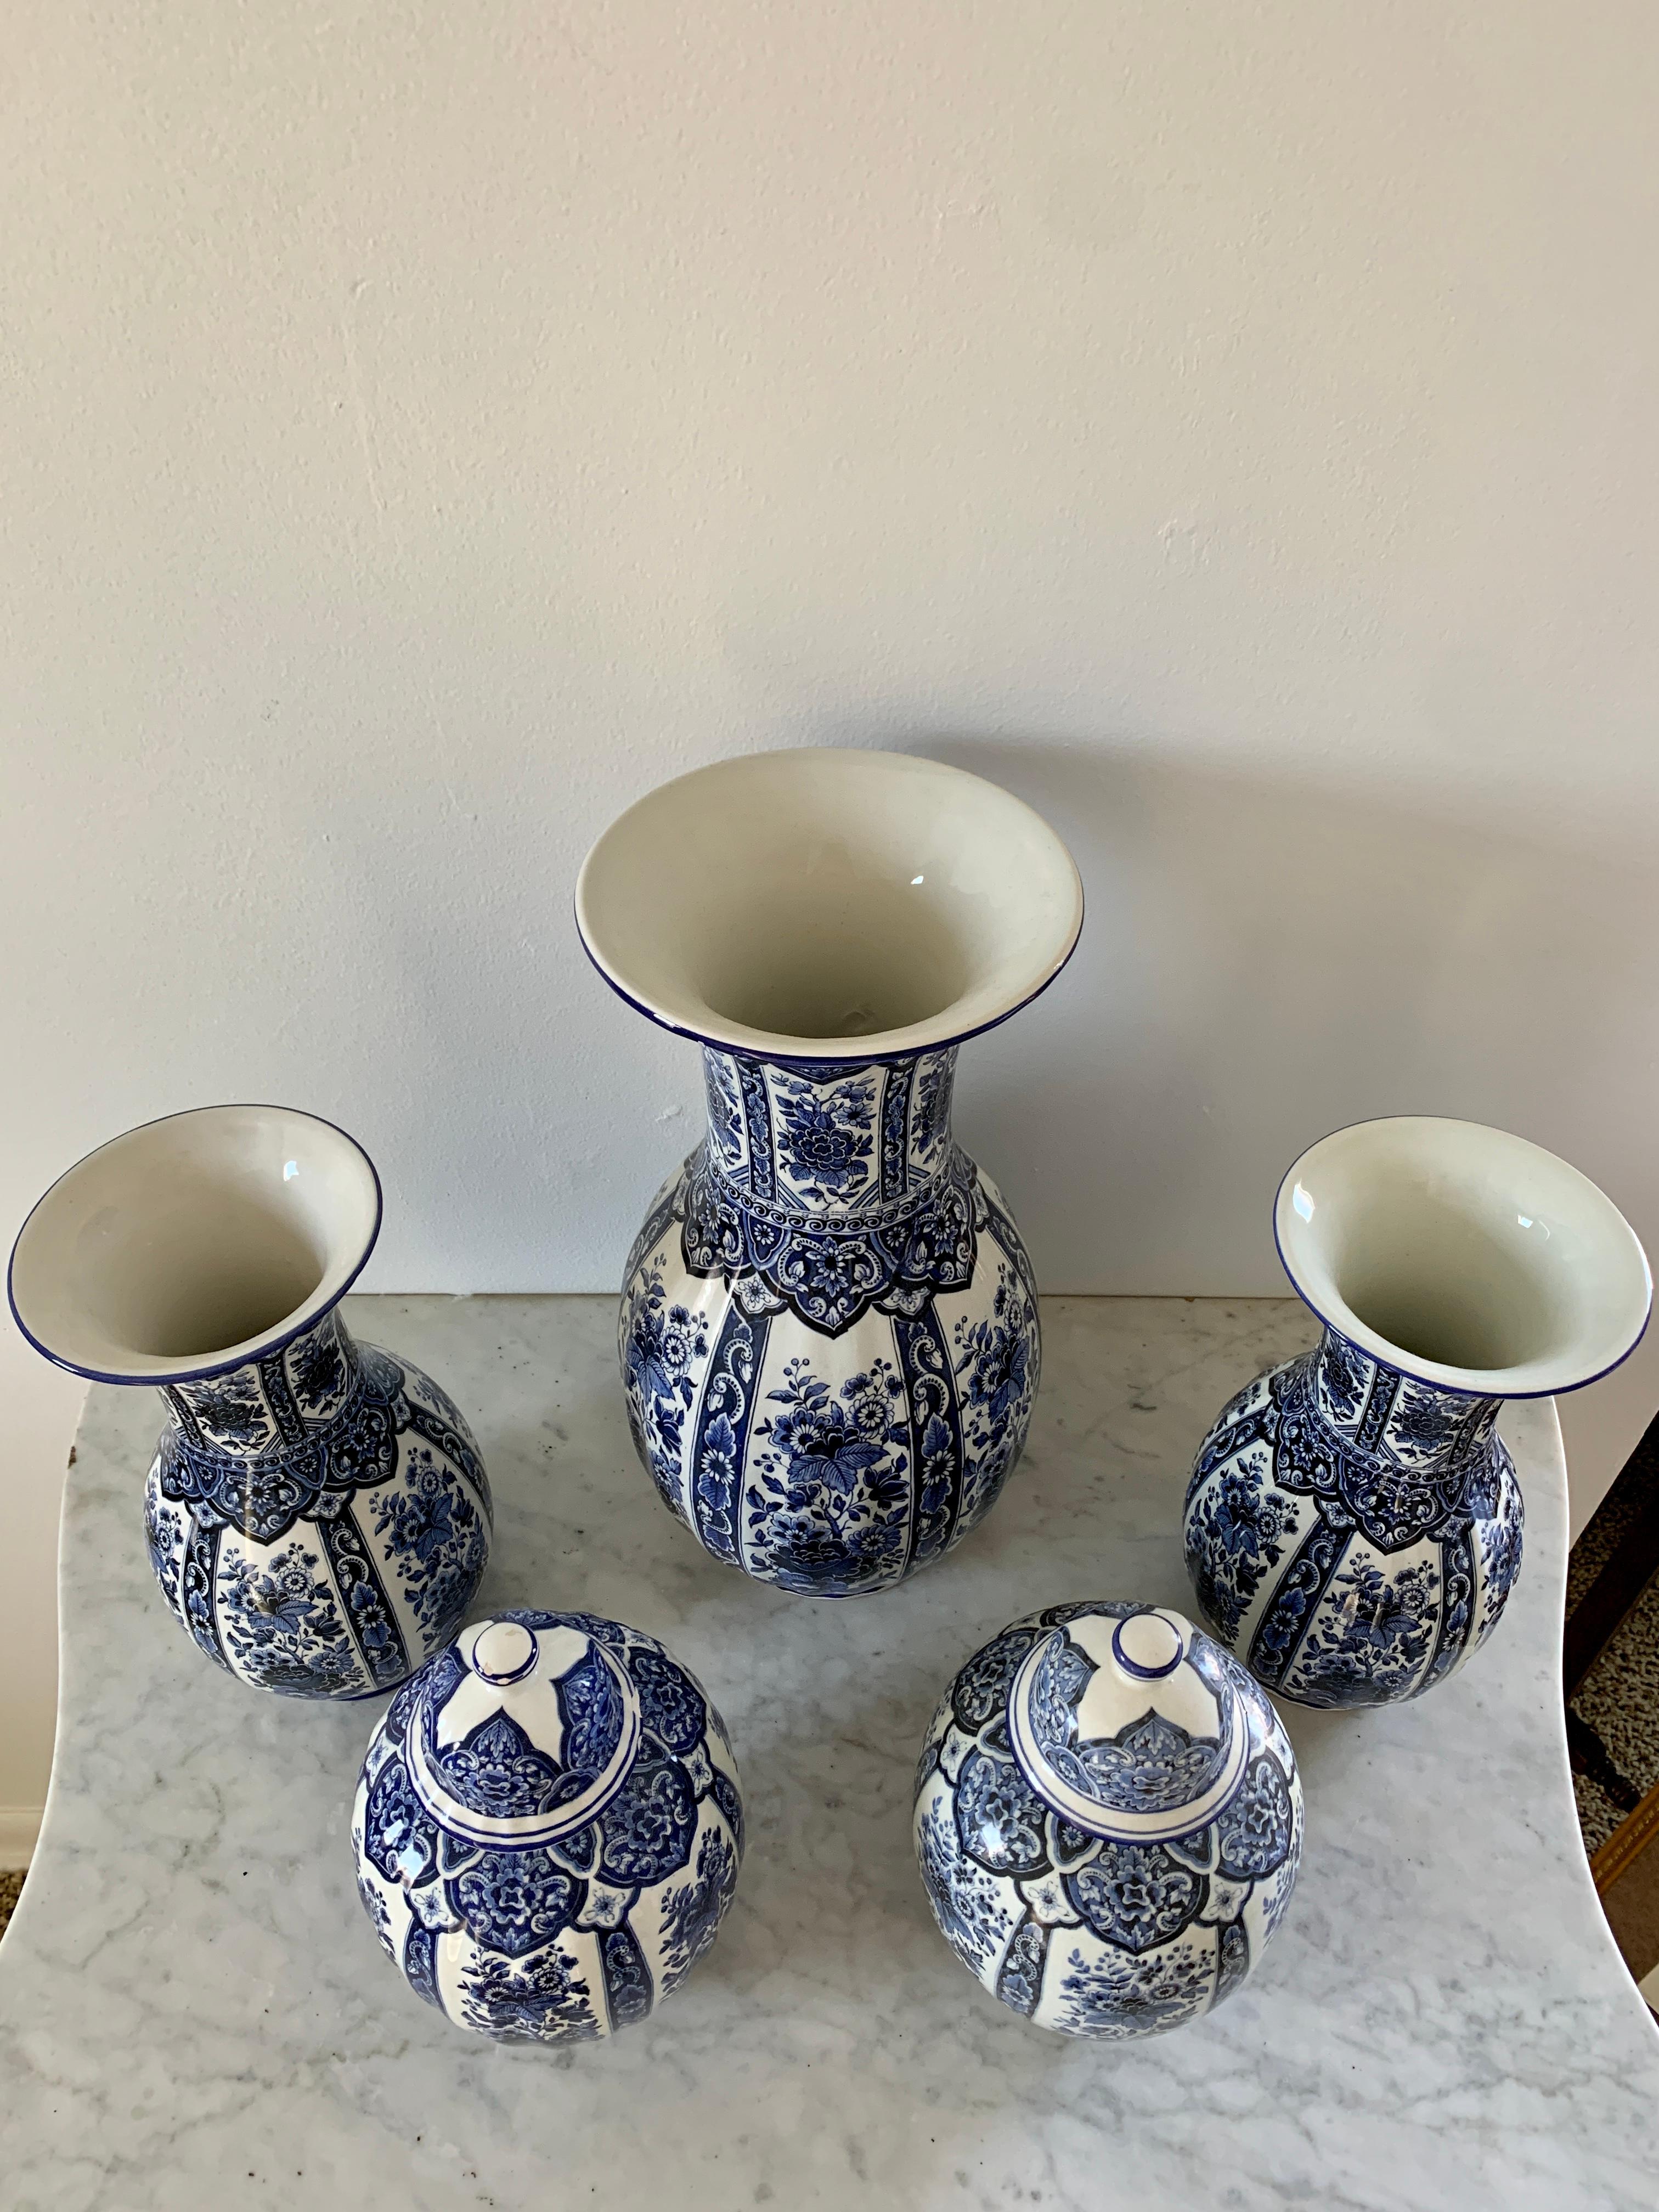 A wonderful set of beautiful Italian blue and white porcelains, including three vases and two covered jars. An instant collection! 

By Ardalt Blue Delfia

Italy, Mid-20th Century

Large Vase Measures: 7ʺW × 7ʺD × 14.25ʺH
Small Vases Measure: 5.25ʺW